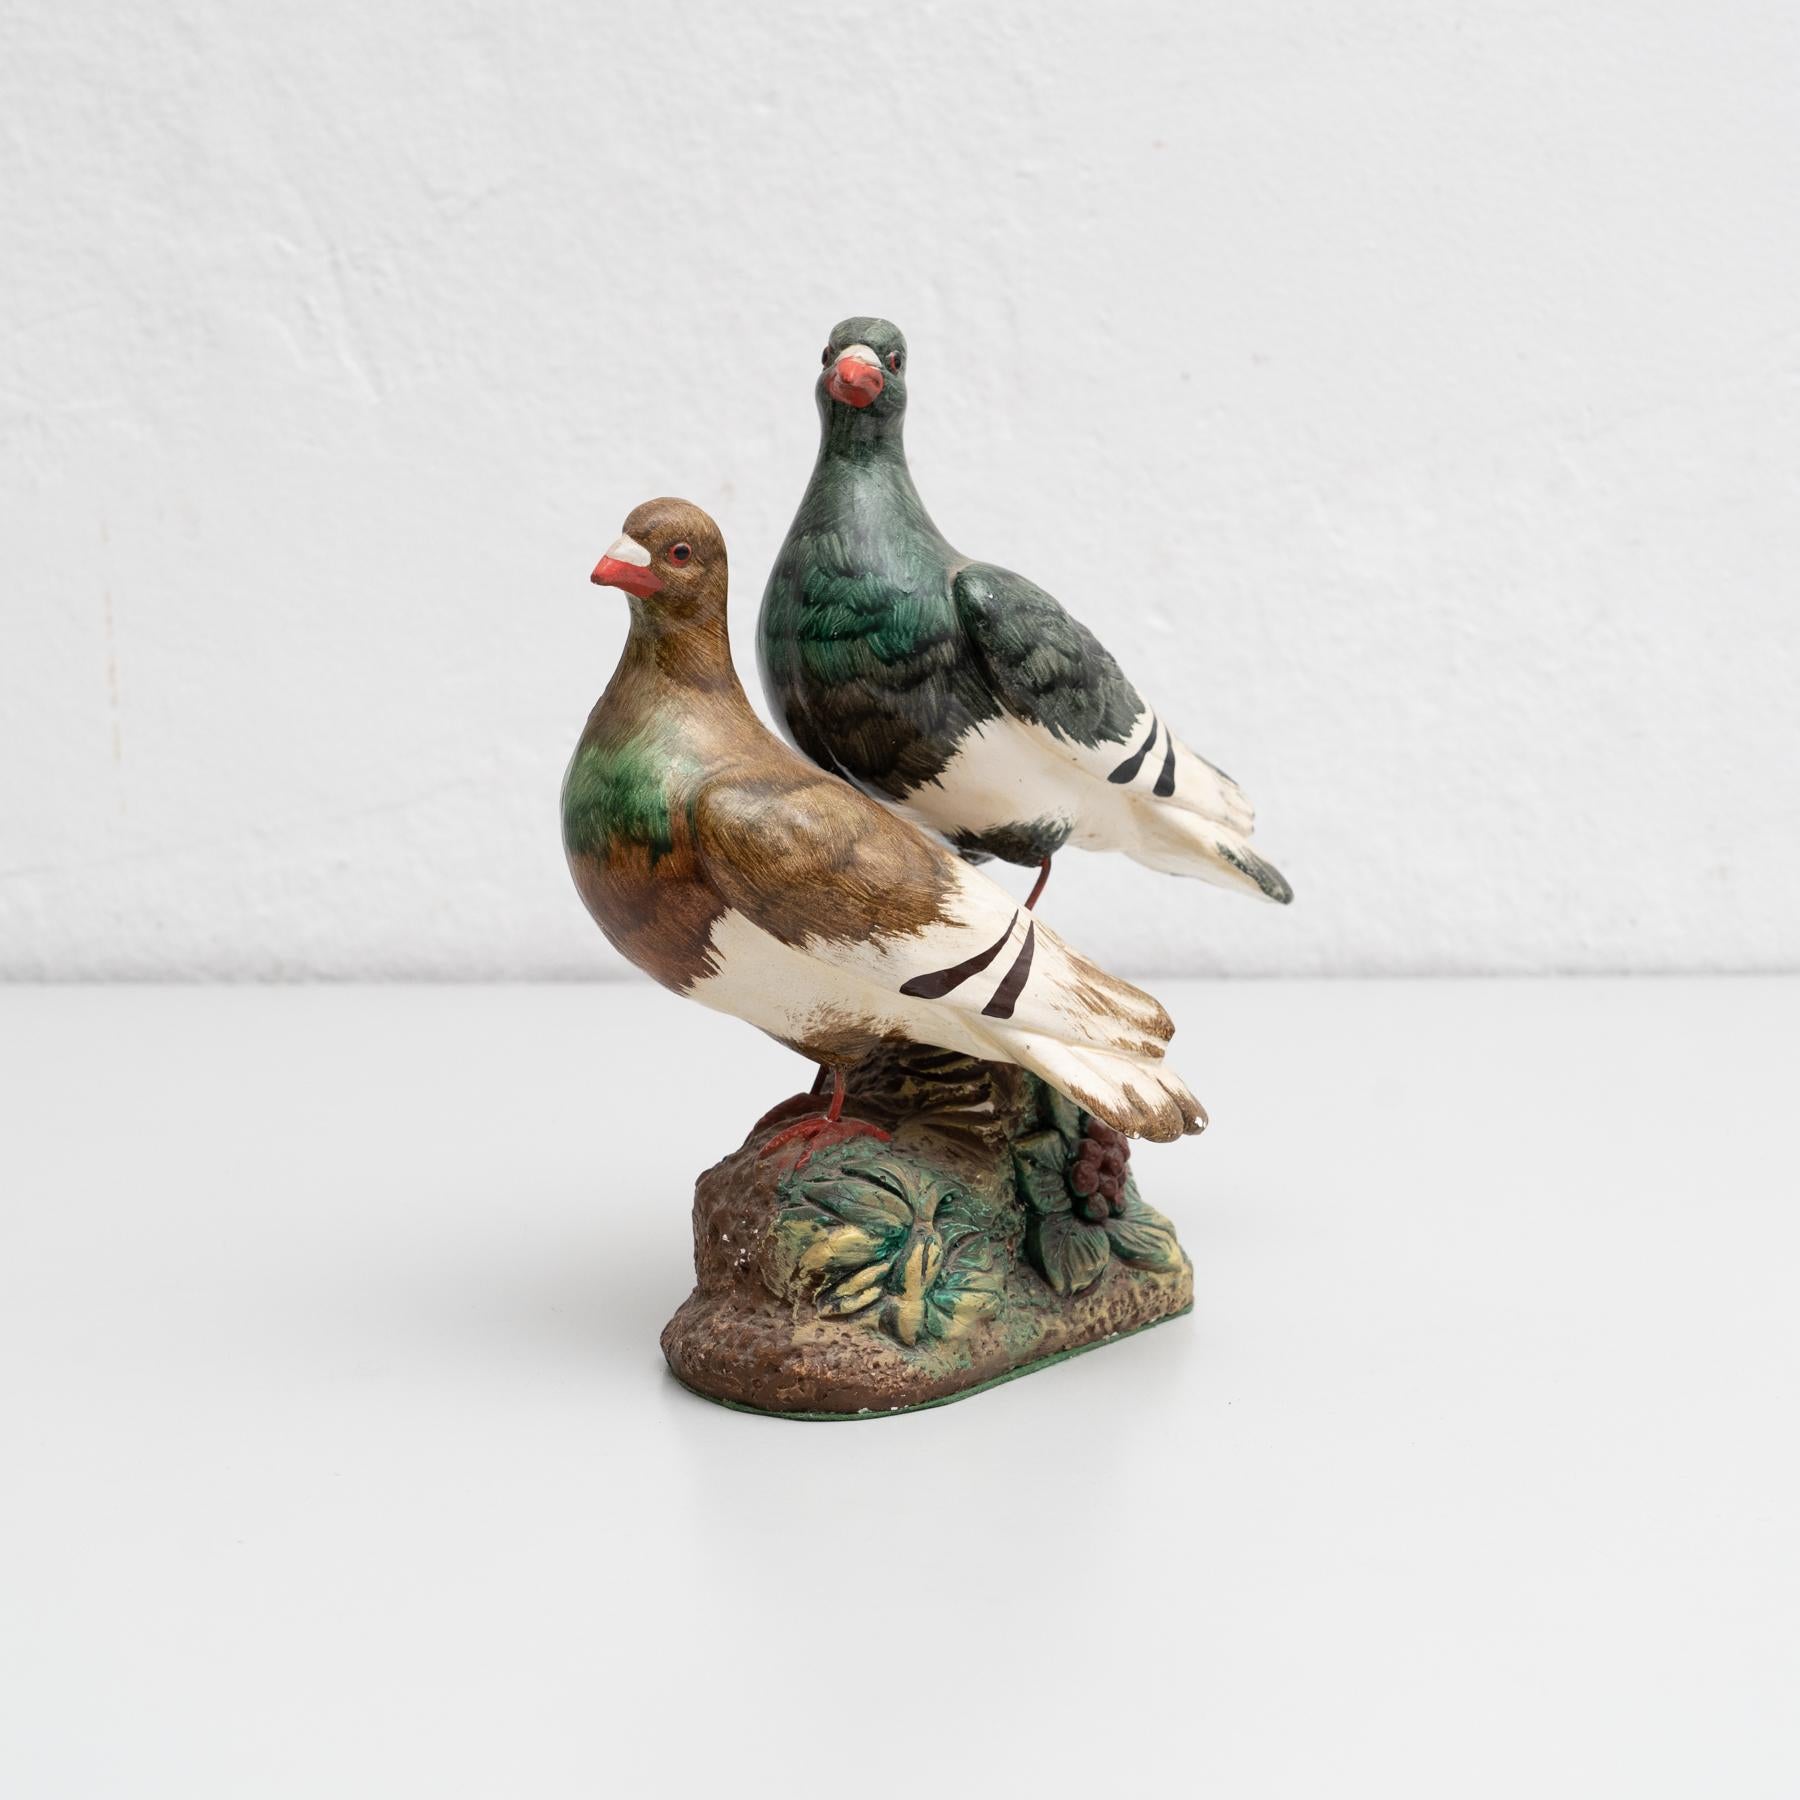 Rare plaster figure of two doves. Hand-painted.

Made in Spain, circa 1950.

In original condition, with minor wear consistent with age and use, preserving a beautiful patina.

Materials:
Plaster.